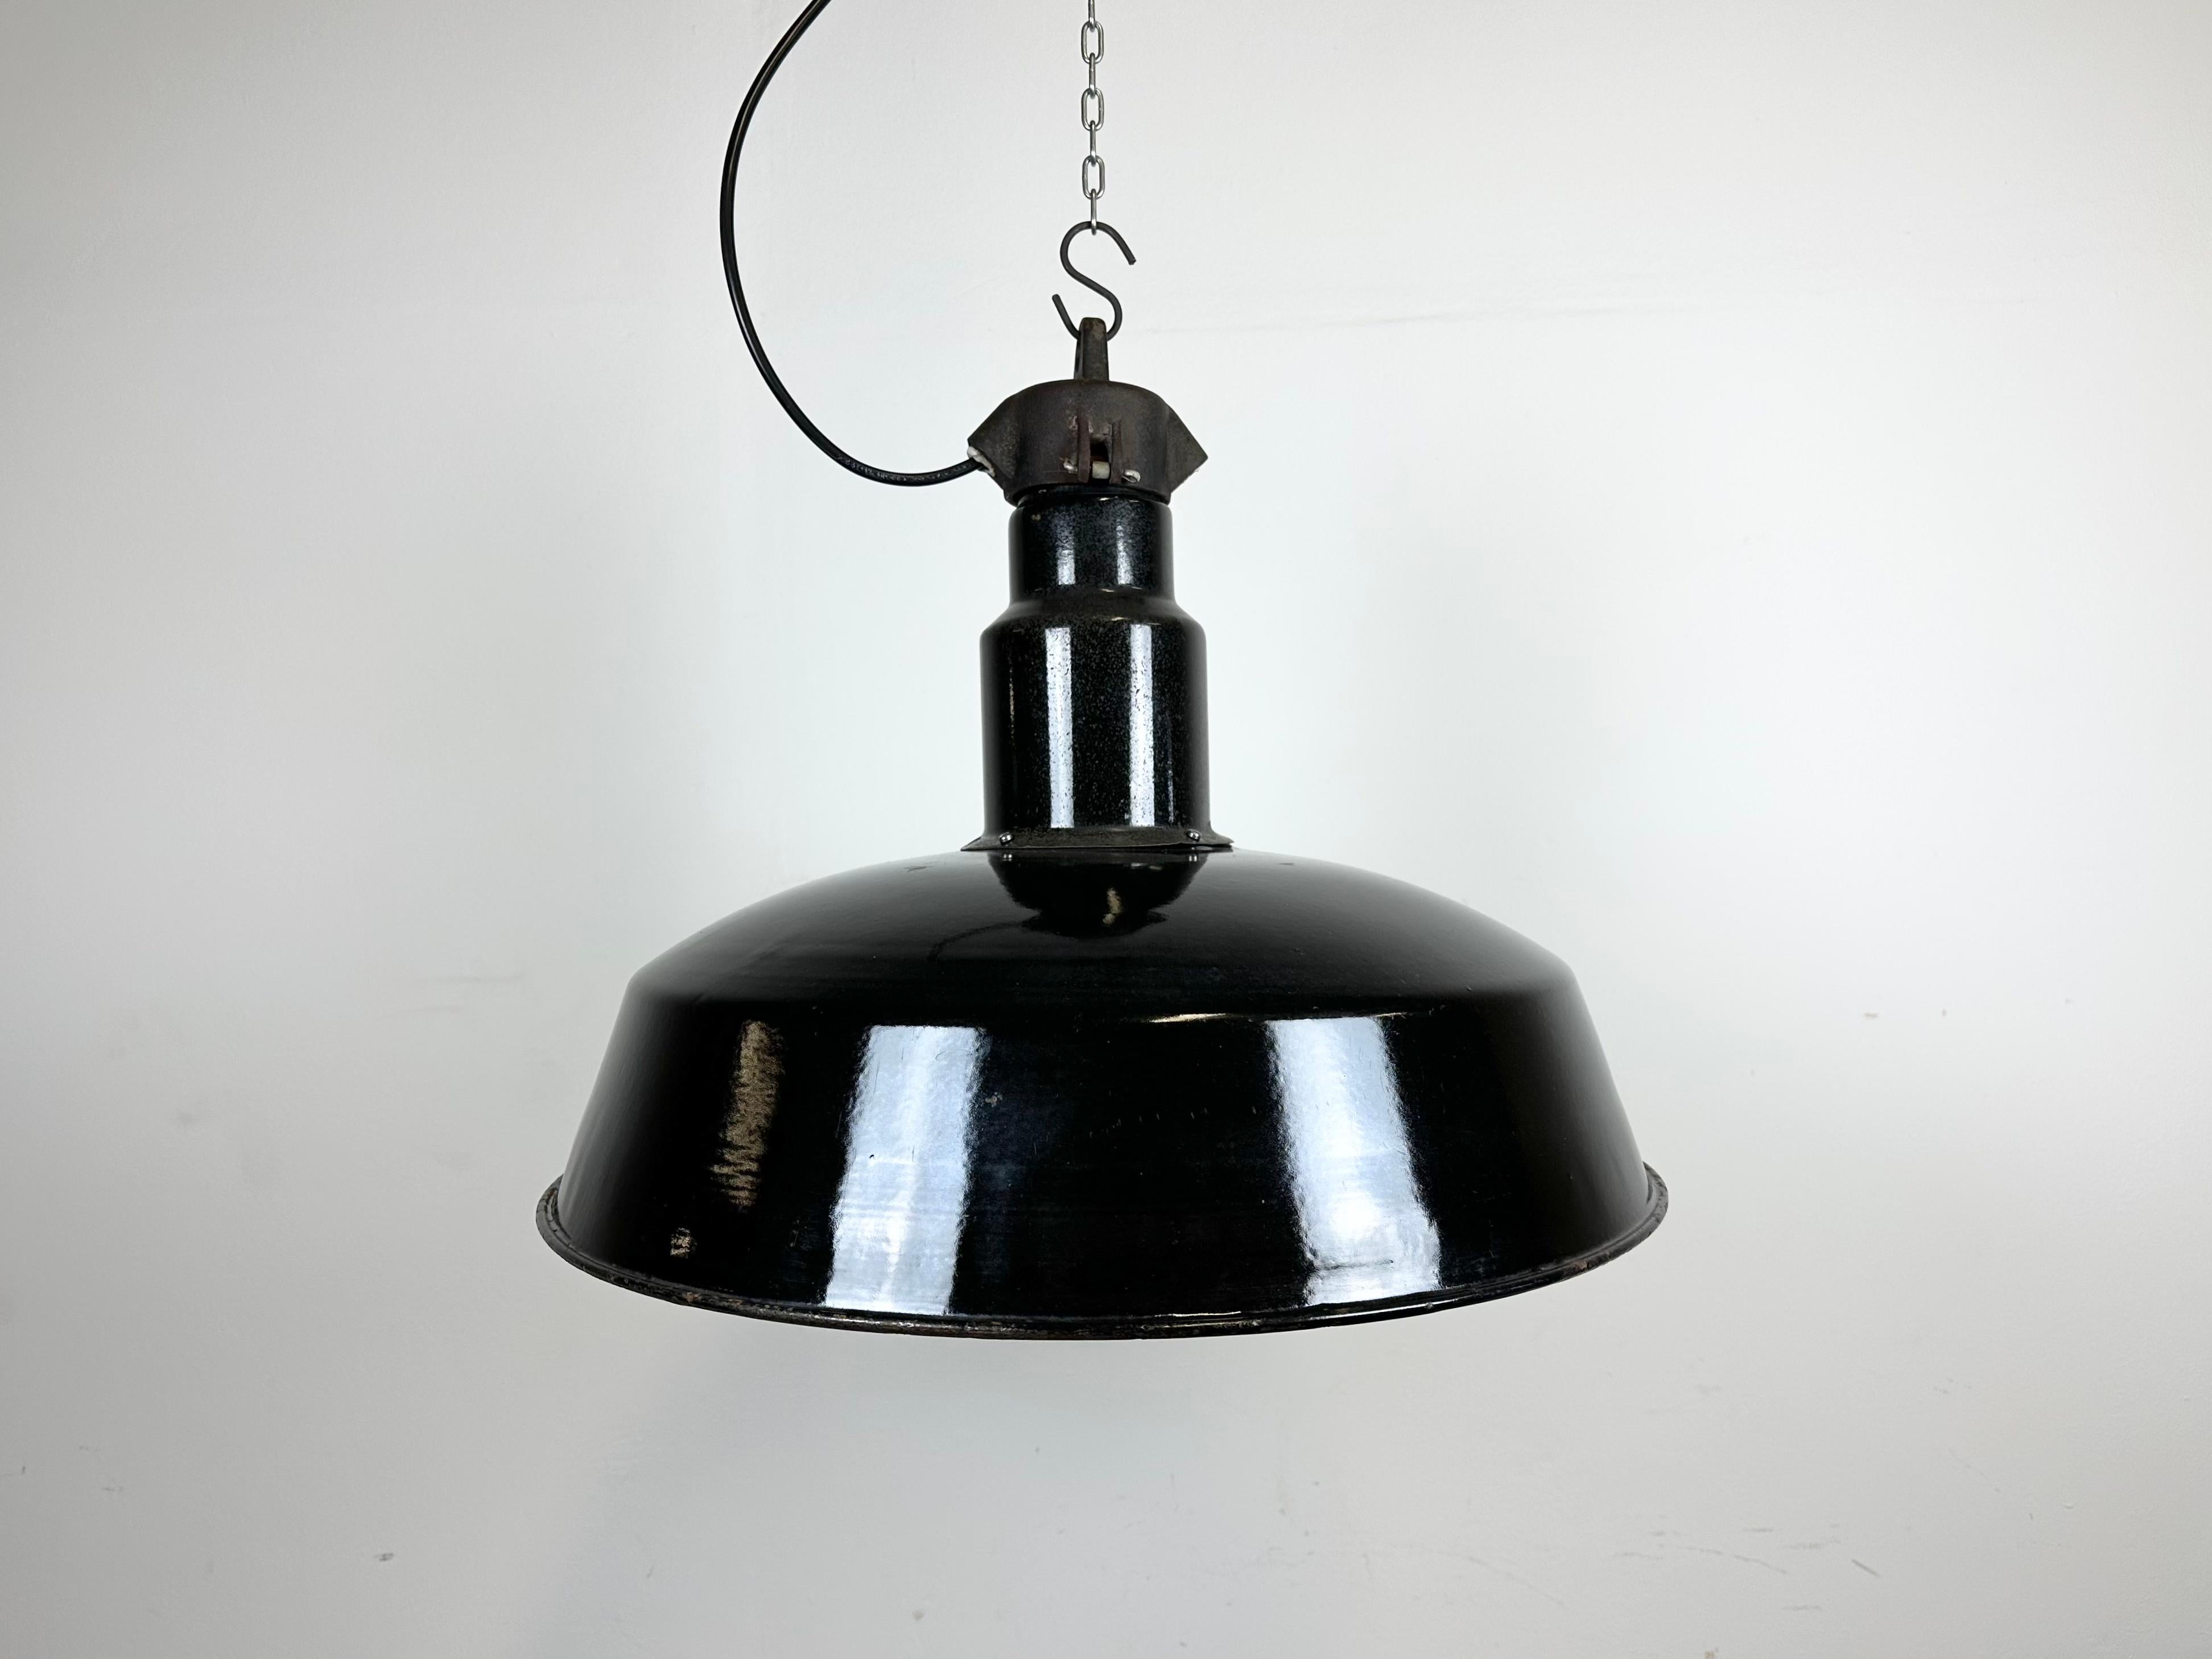 This industrial factory pendant lamp was made in former Czechoslovakia during the 1950s. It features a black enamel exterior ,a white enamel interior and cast iron top.The porcelain socket requires E 27/E 26 light bulbs . New wire. The weight of the